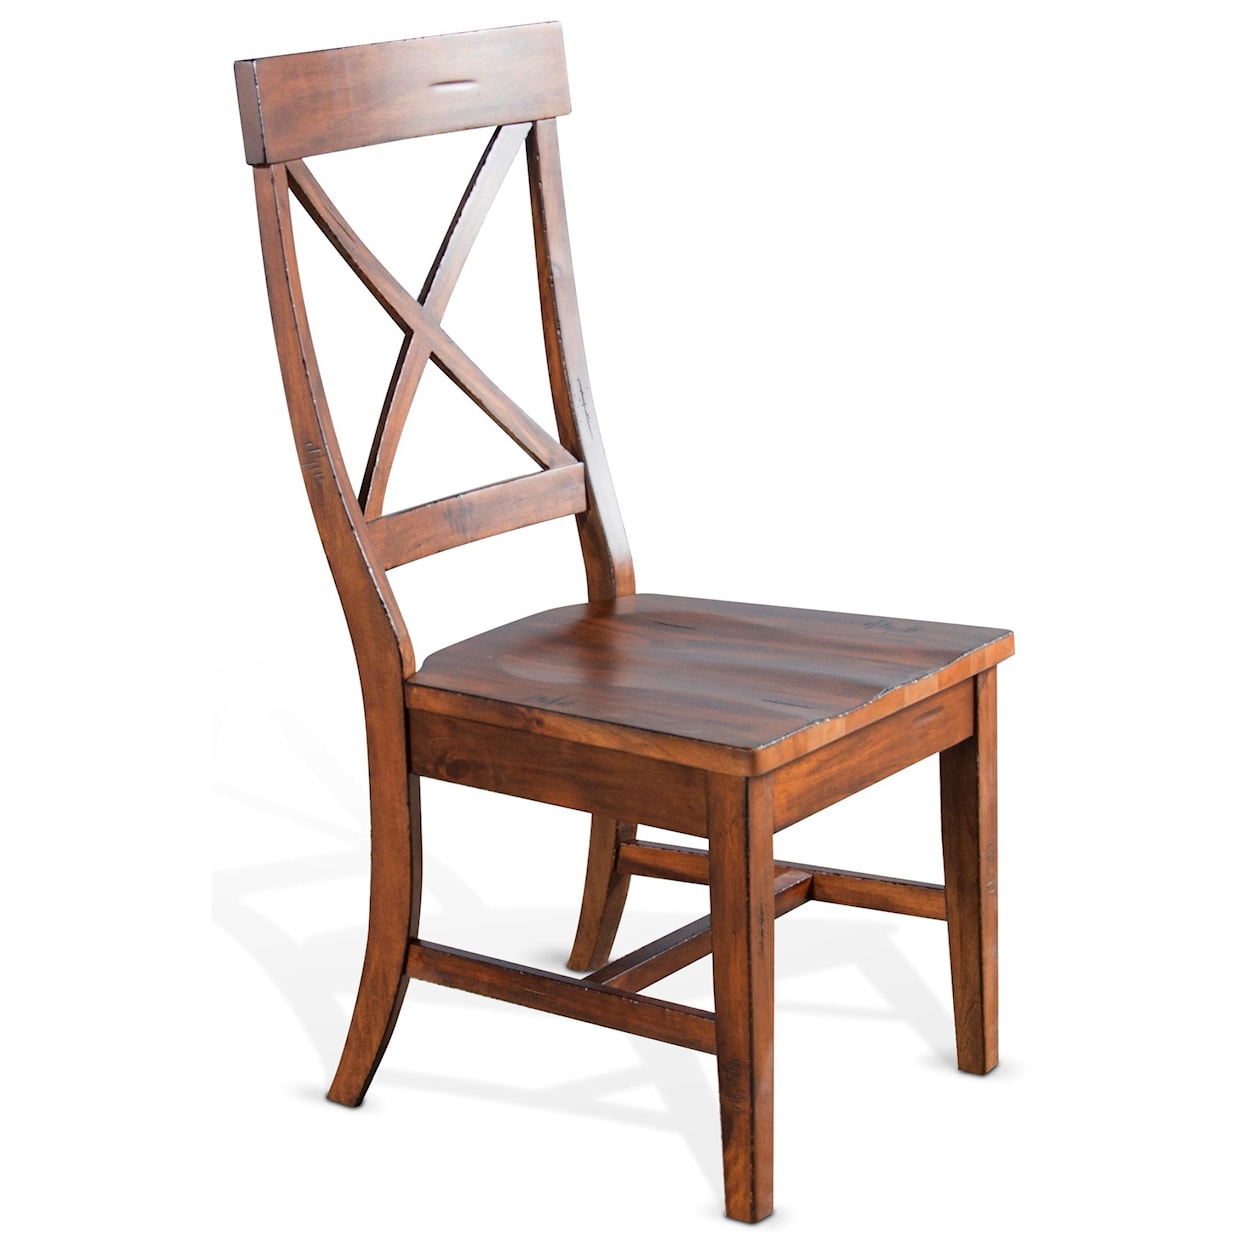 Sunny Designs Tuscany Crossback Chair